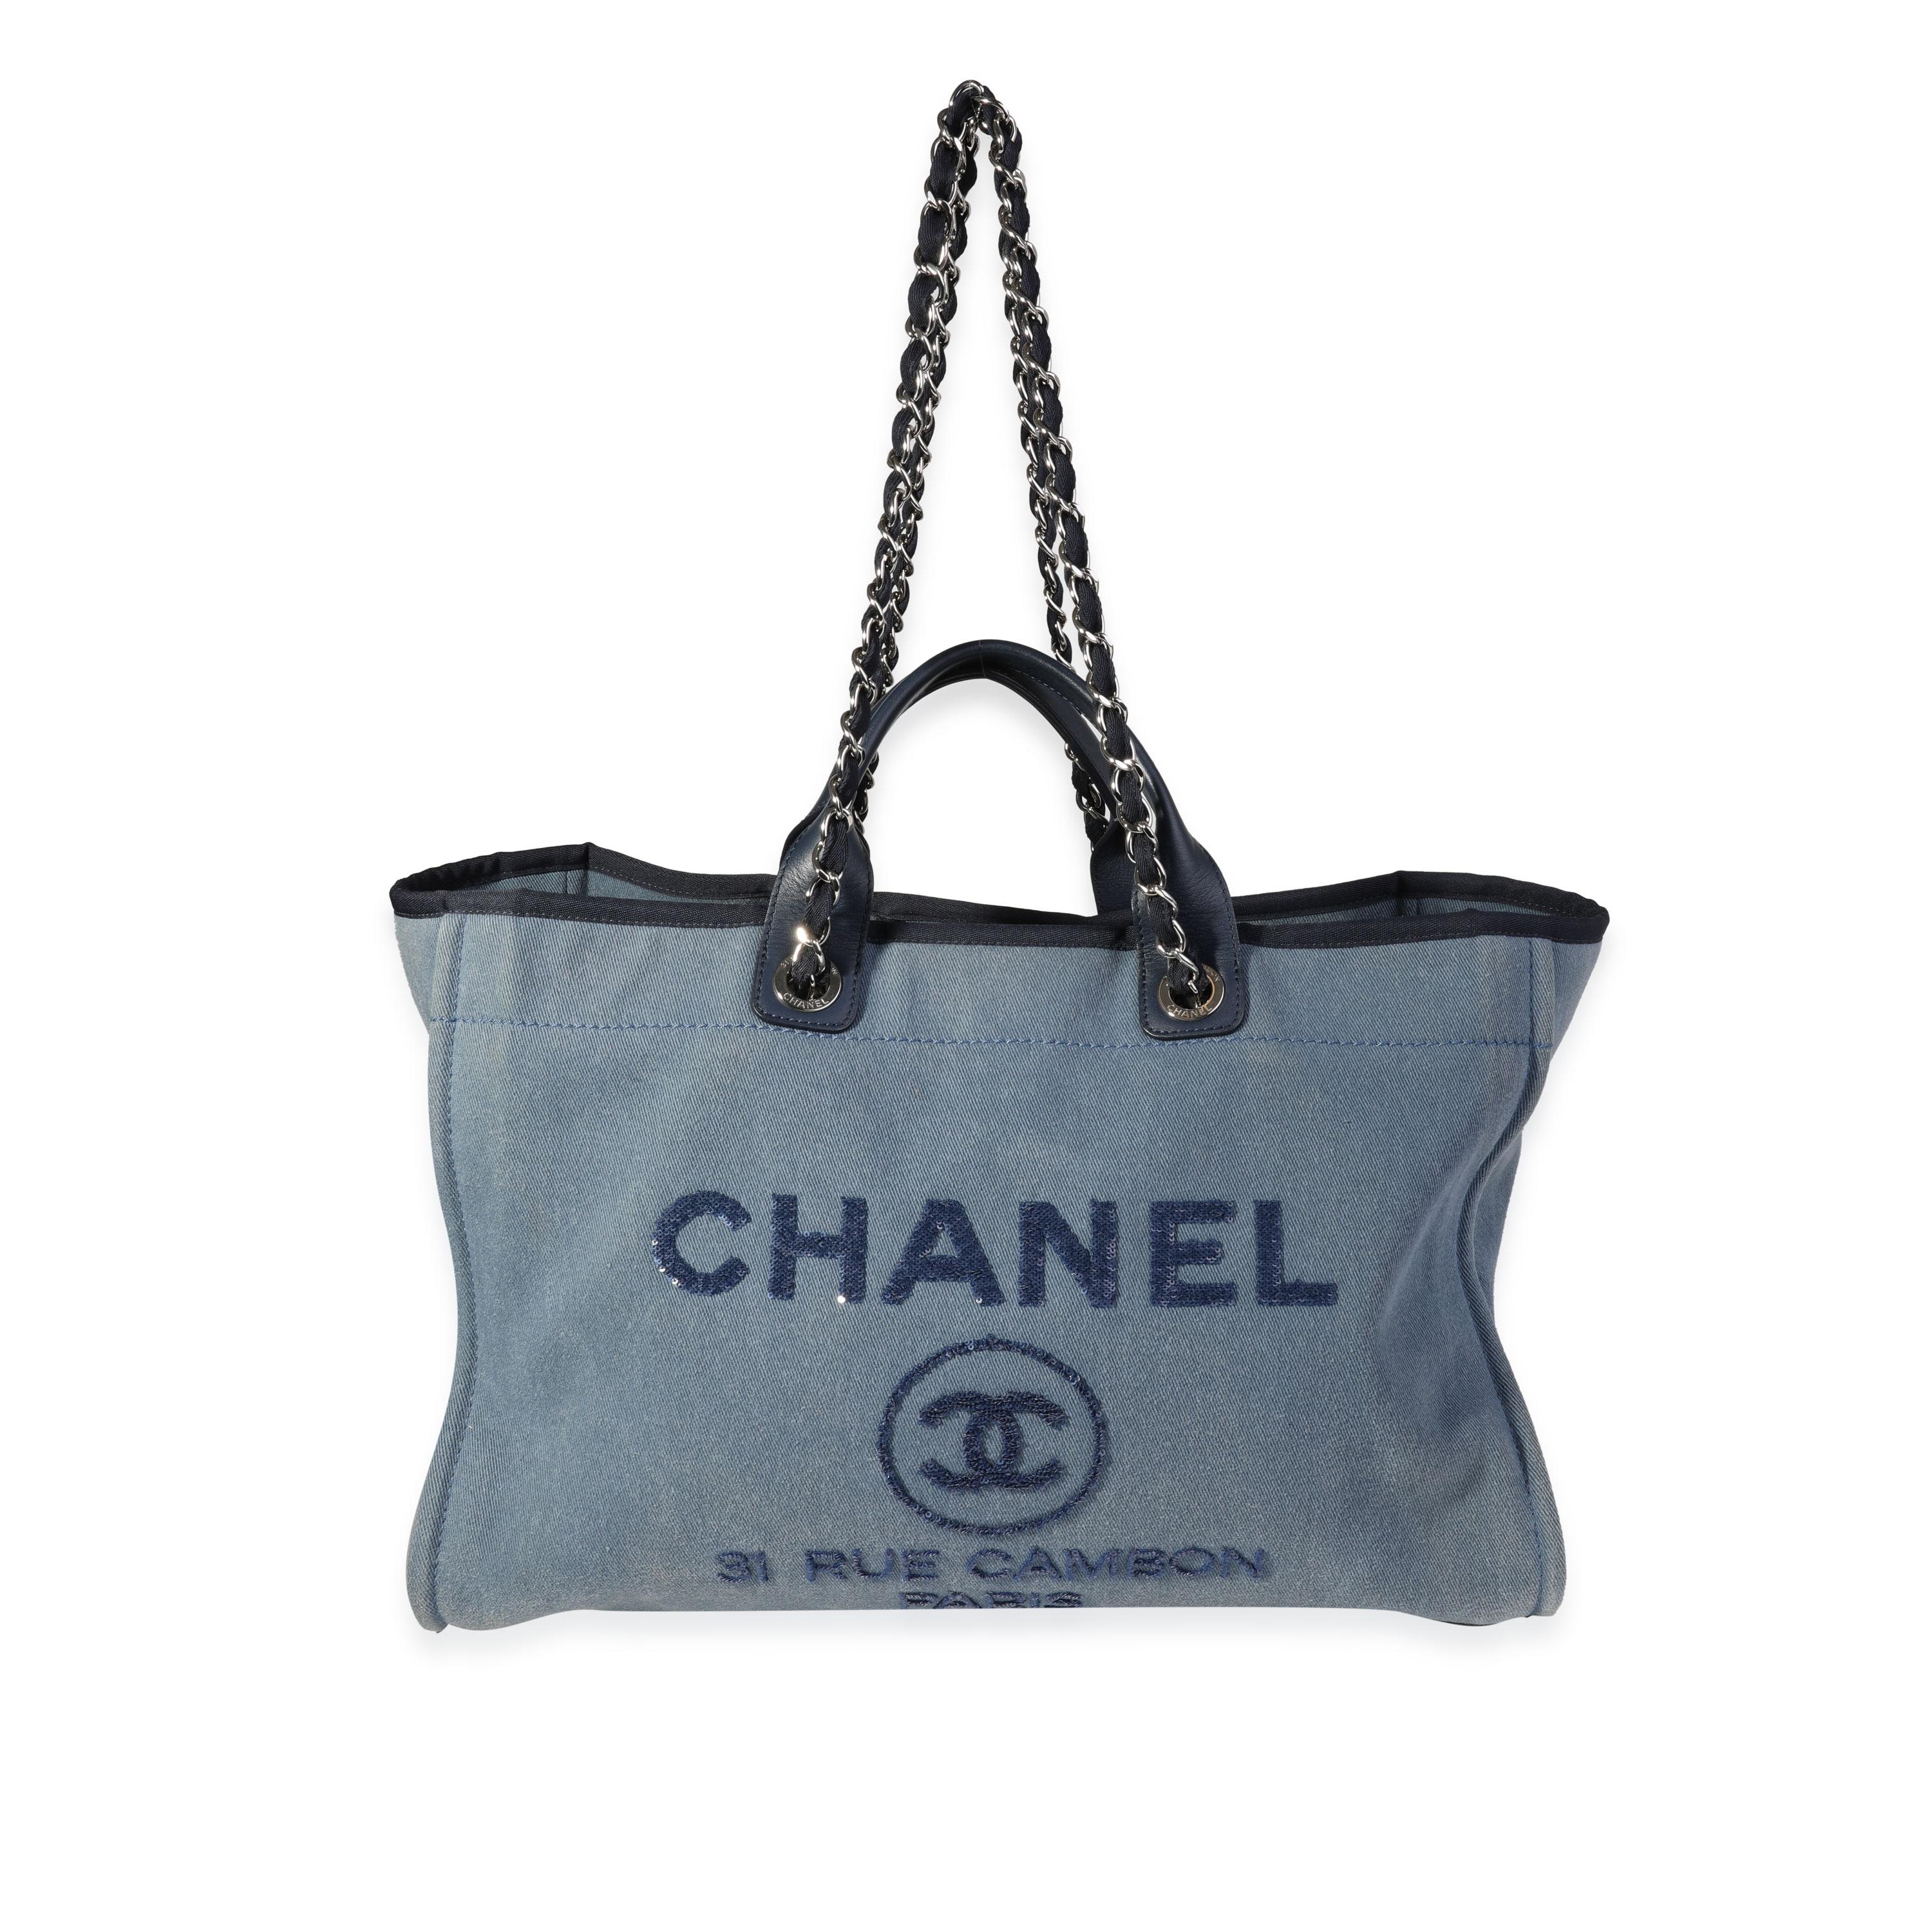 Listing Title: Chanel Blue Canvas & Sequins Large Deauville Tote
SKU: 120932
Condition: Pre-owned (3000)
Handbag Condition: Very Good
Condition Comments: Fading and wear to denim. Interior shows signs of use.
Brand: Chanel
Model: Deauville
Origin